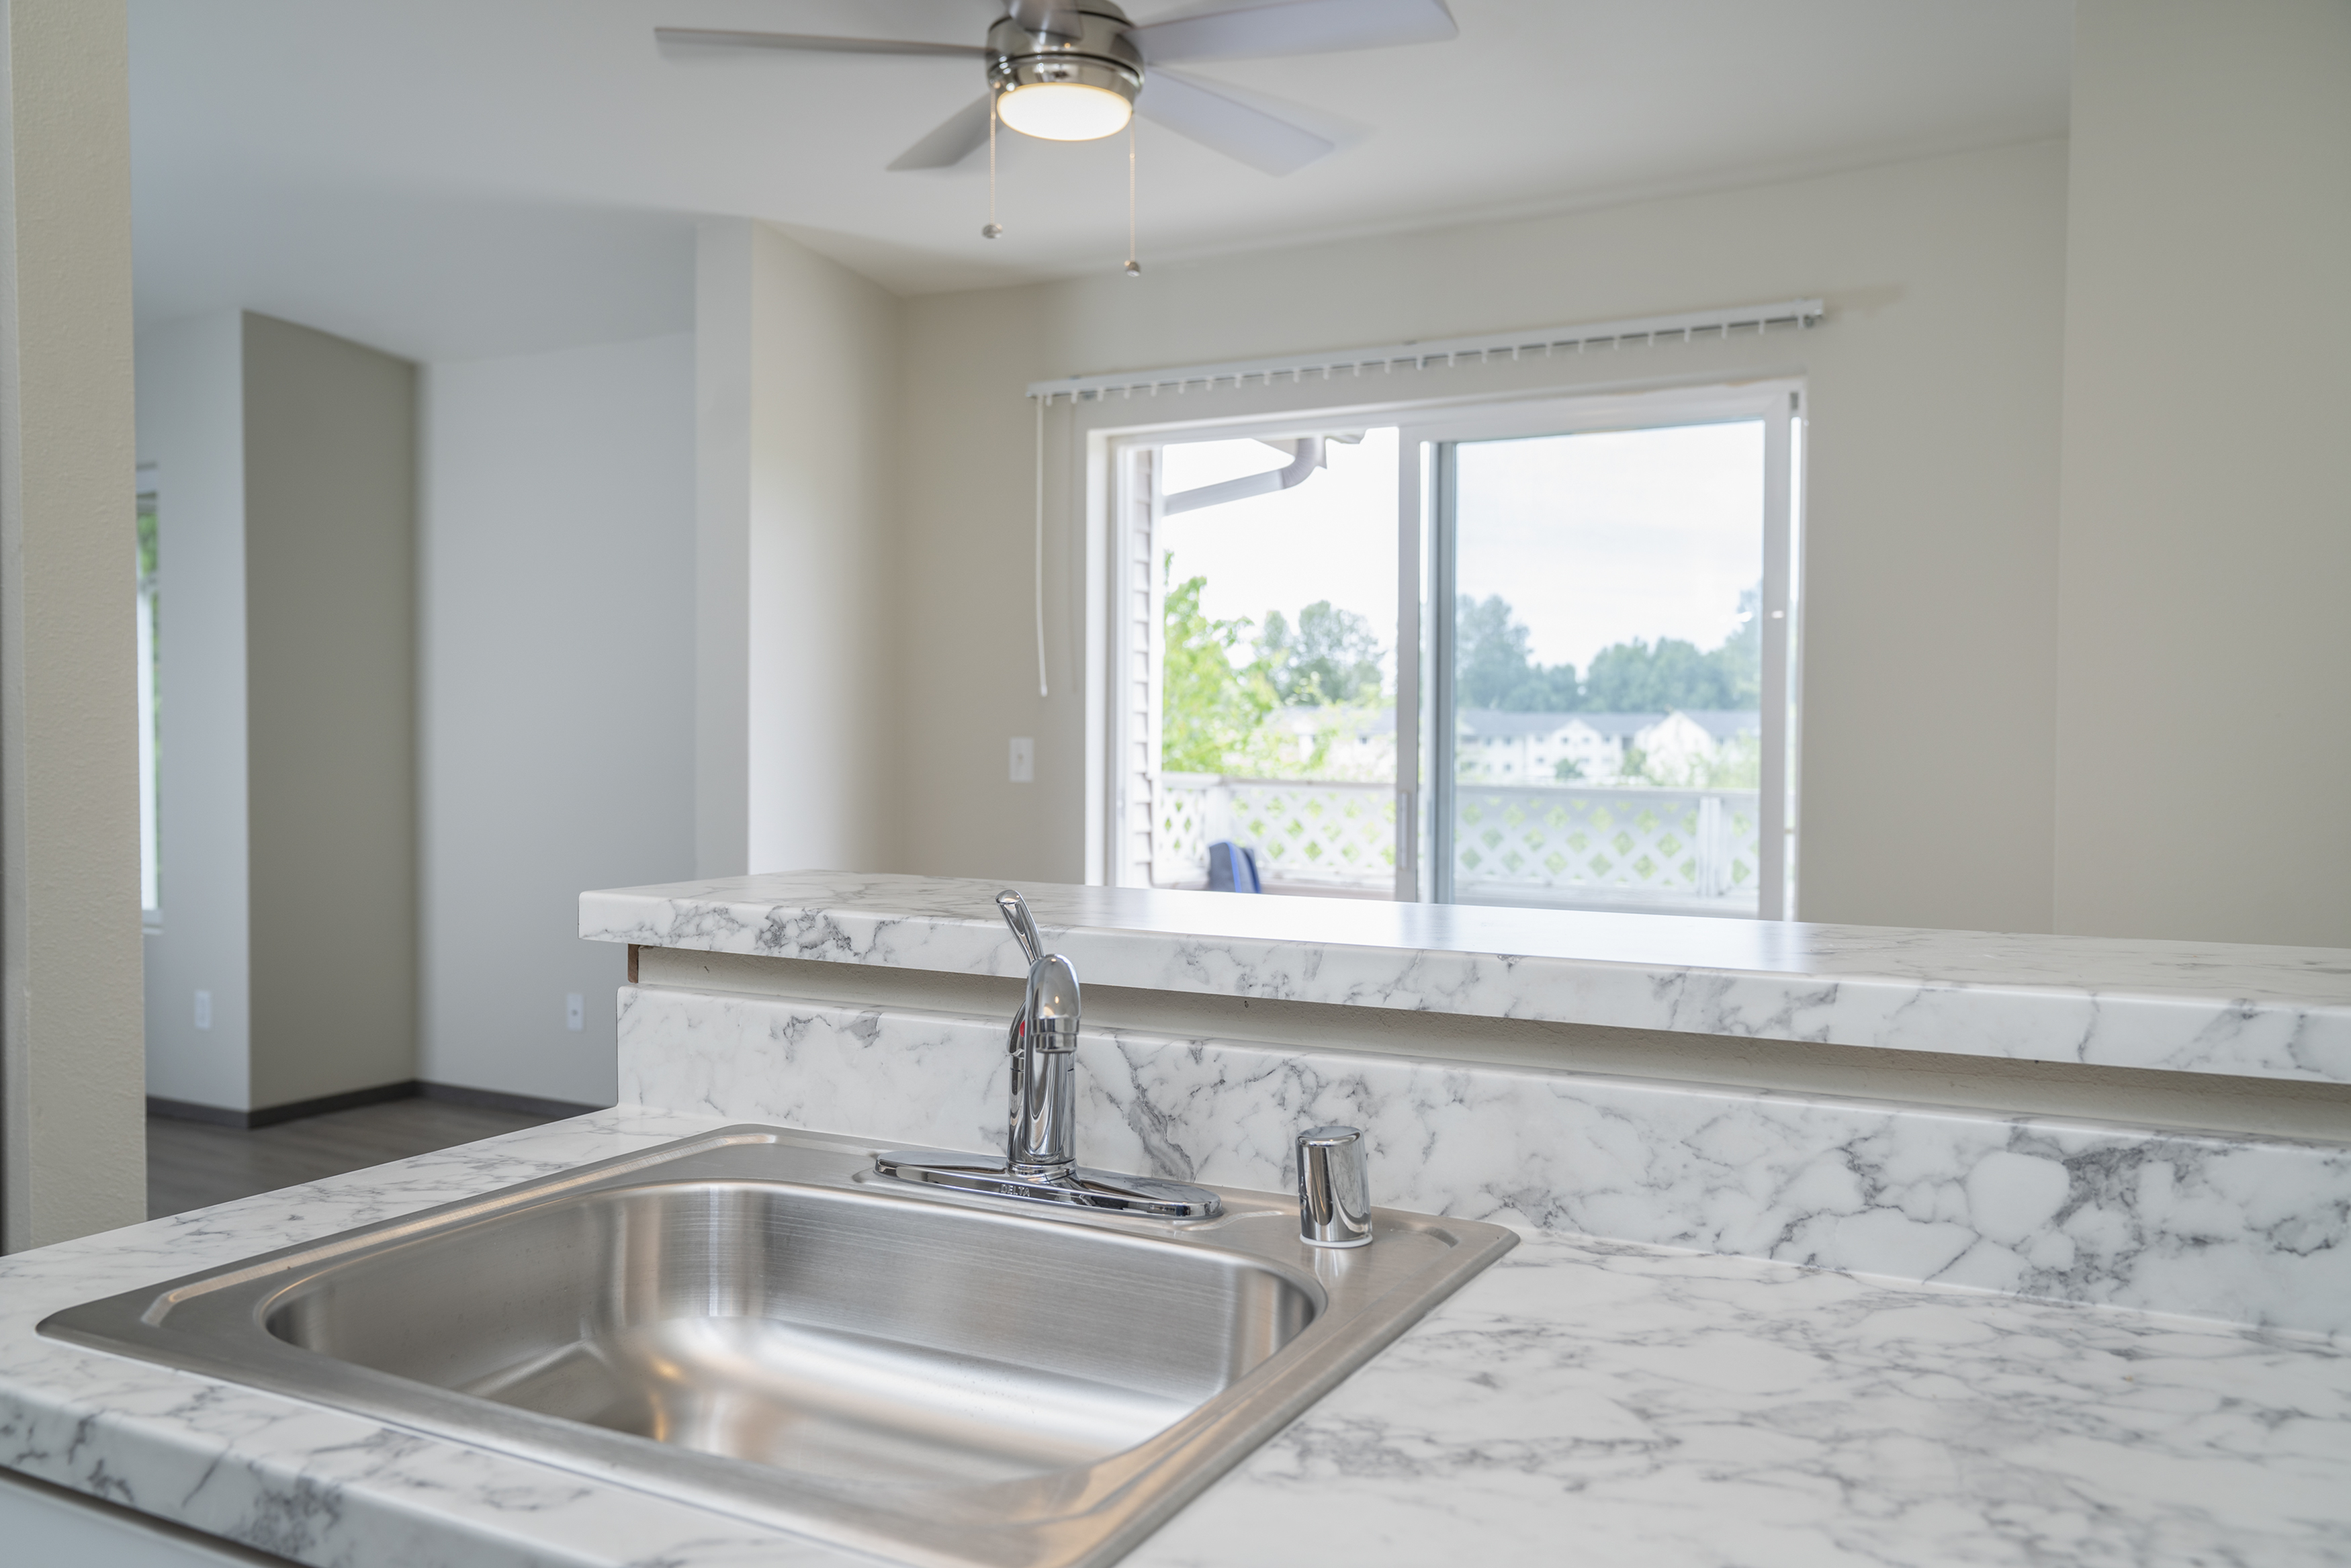 Image of Laminate Countertops with White Marble Design for Nantucket Gate